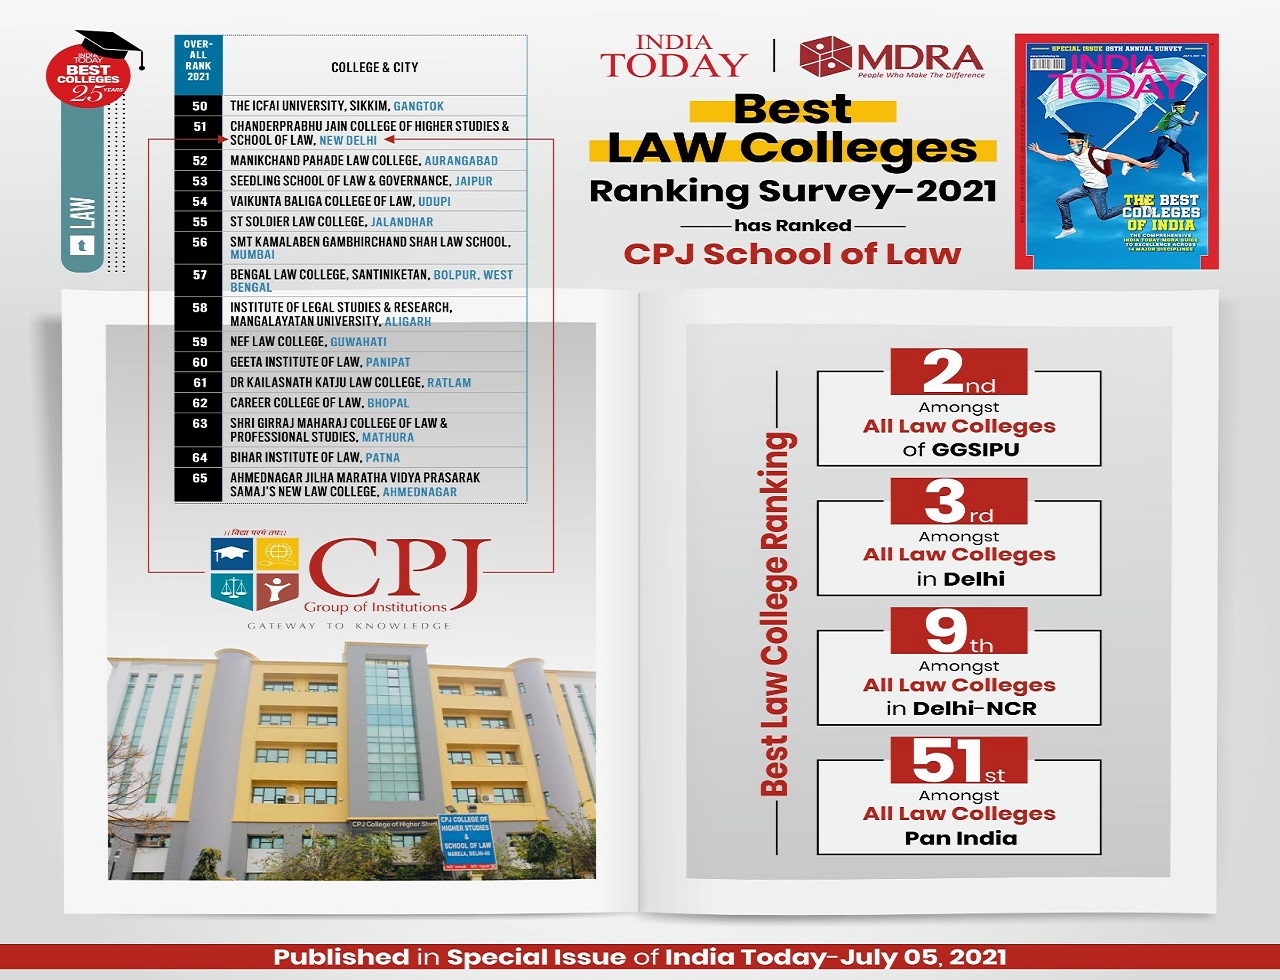 India Today-MDRA Ranking Survey-2021(LAW)